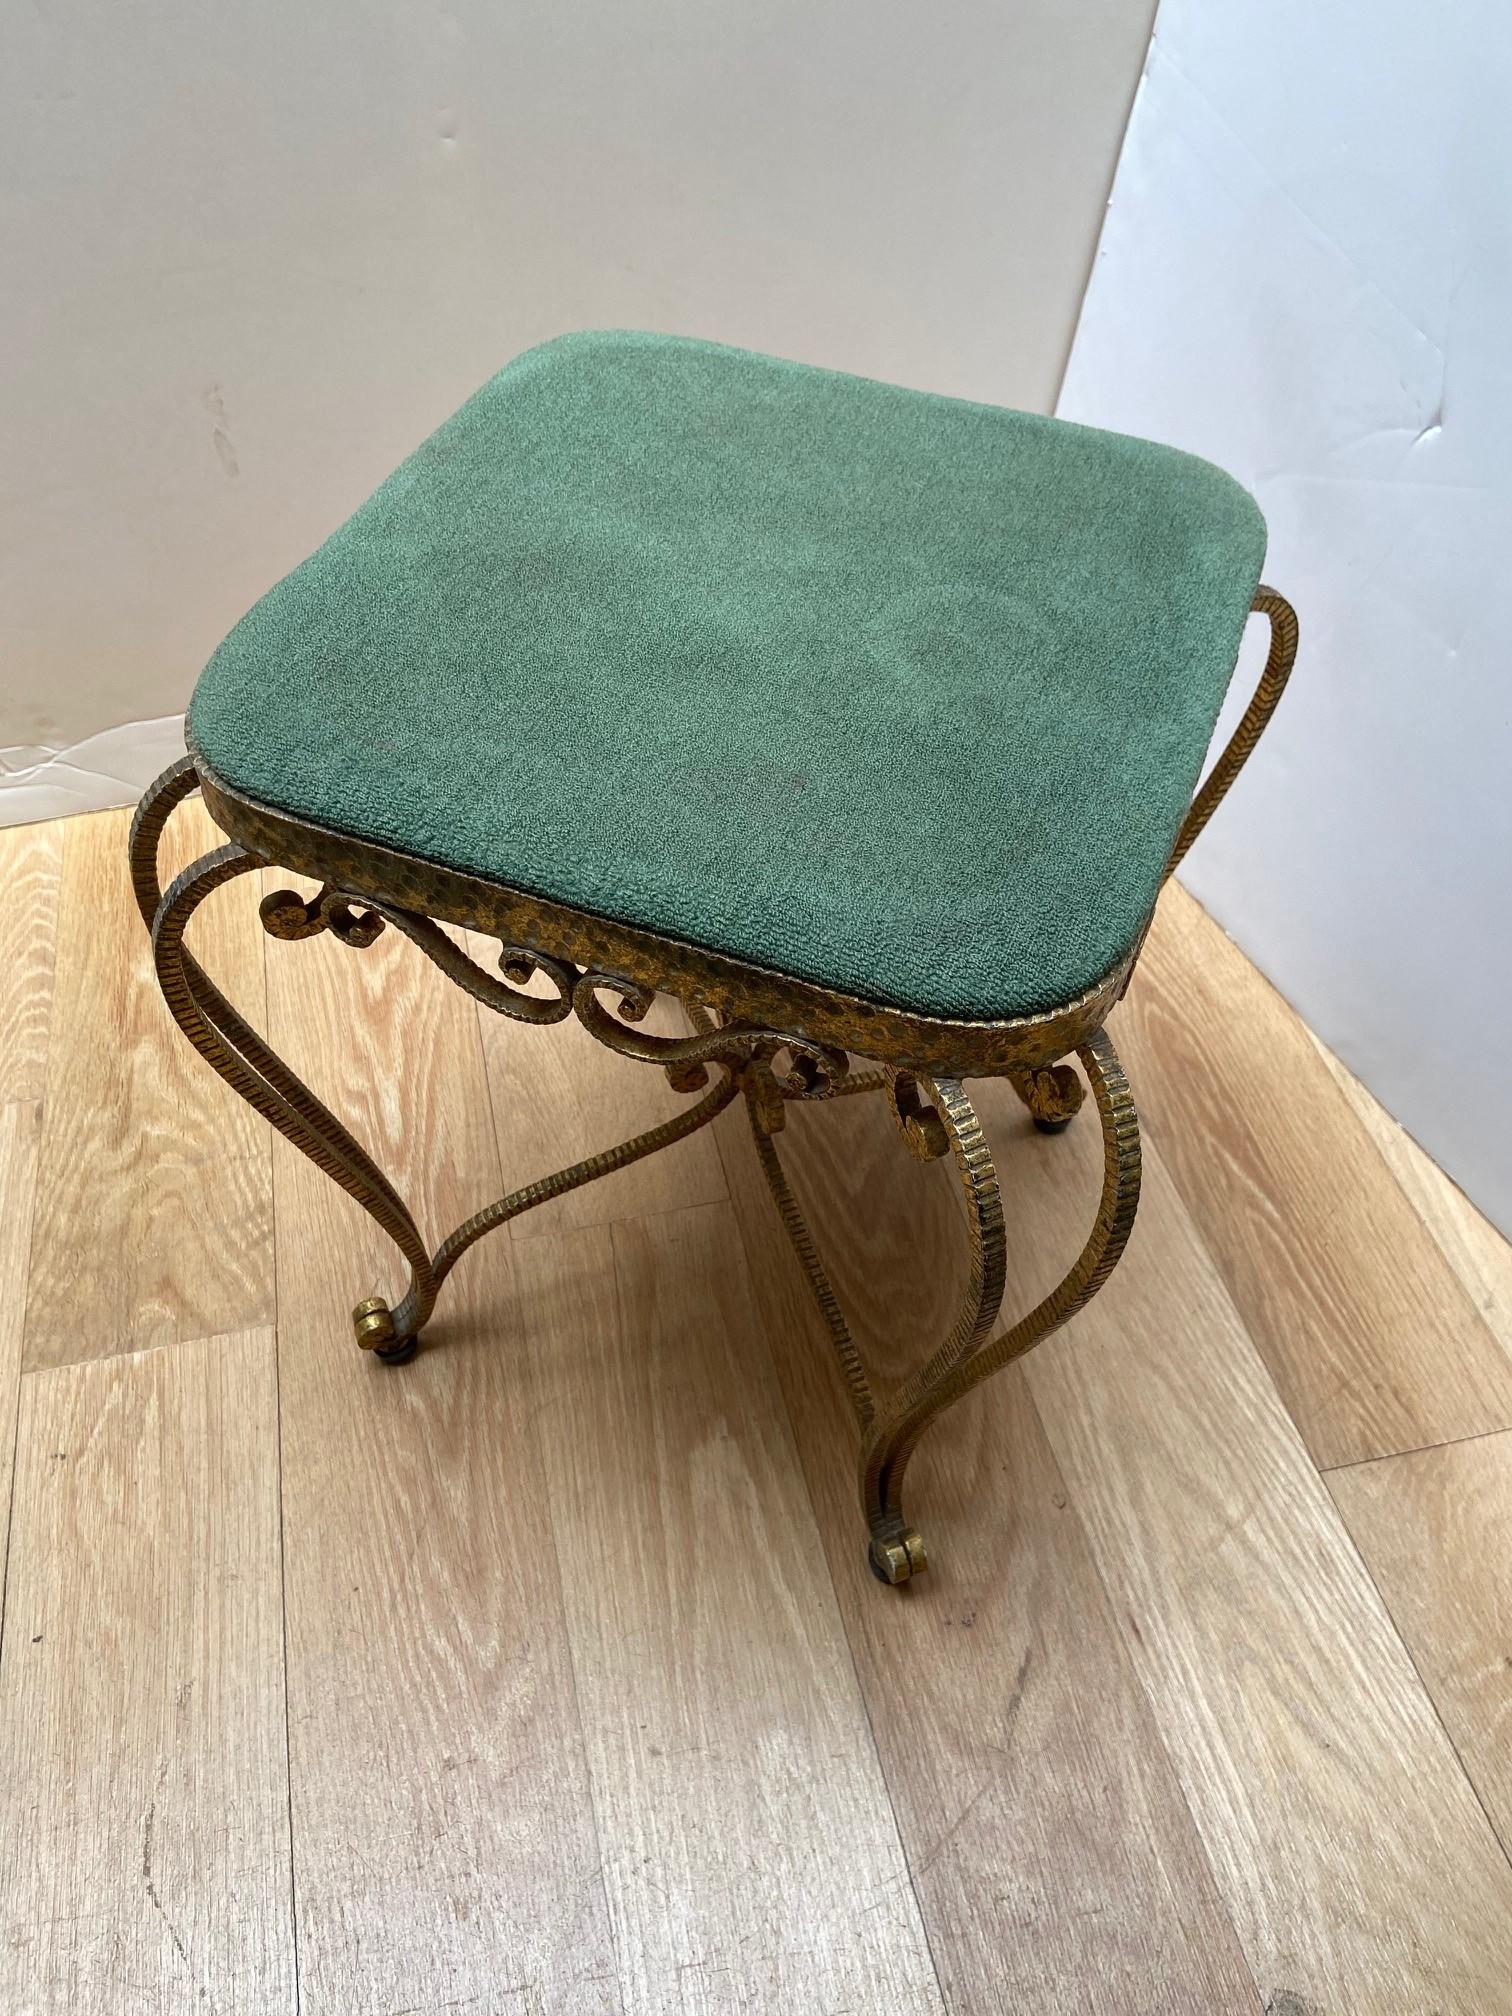 Vintage Mid-Century Modern wrought iron hammered dotted design gold leaf finish foot stool attributed to Pier Luigi Colli
Made in Italy, foam fabric cover seat.